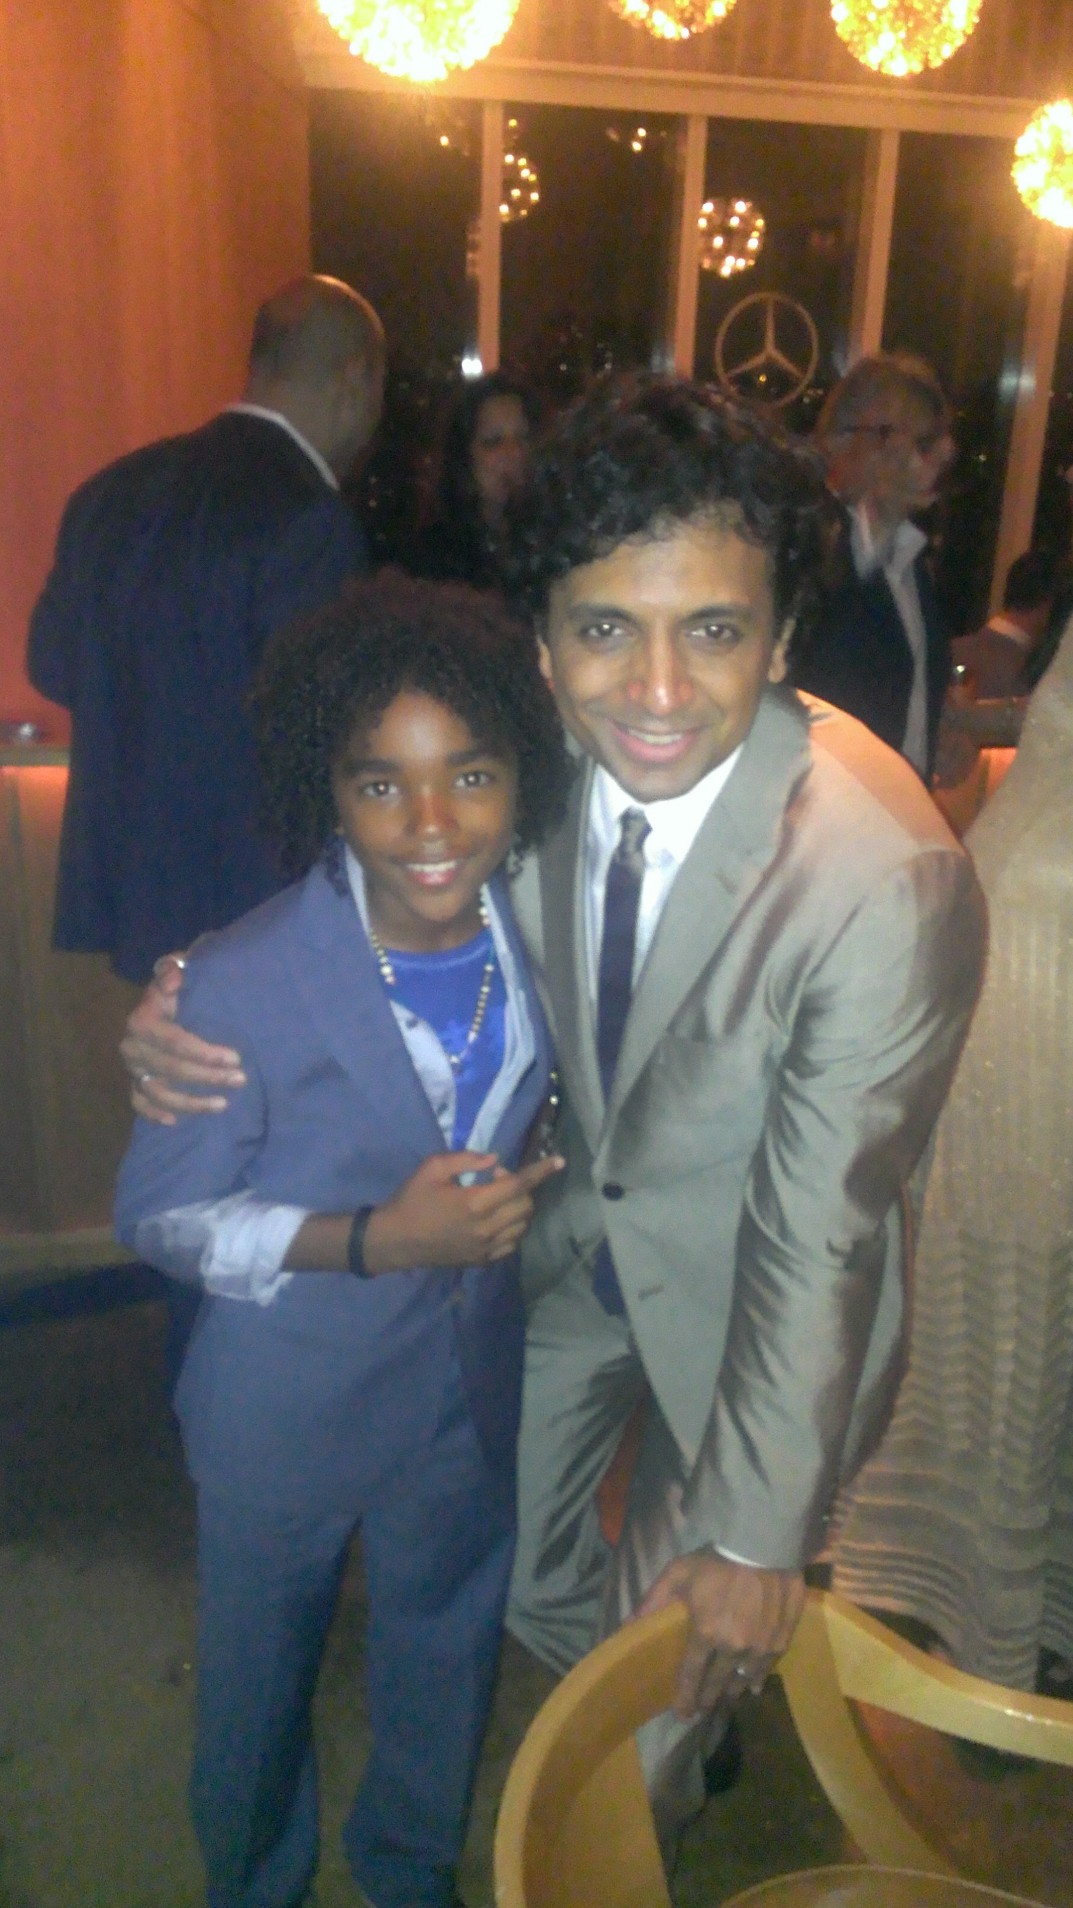 After Earth Premiere After Party with Director M. Night Shyamalan